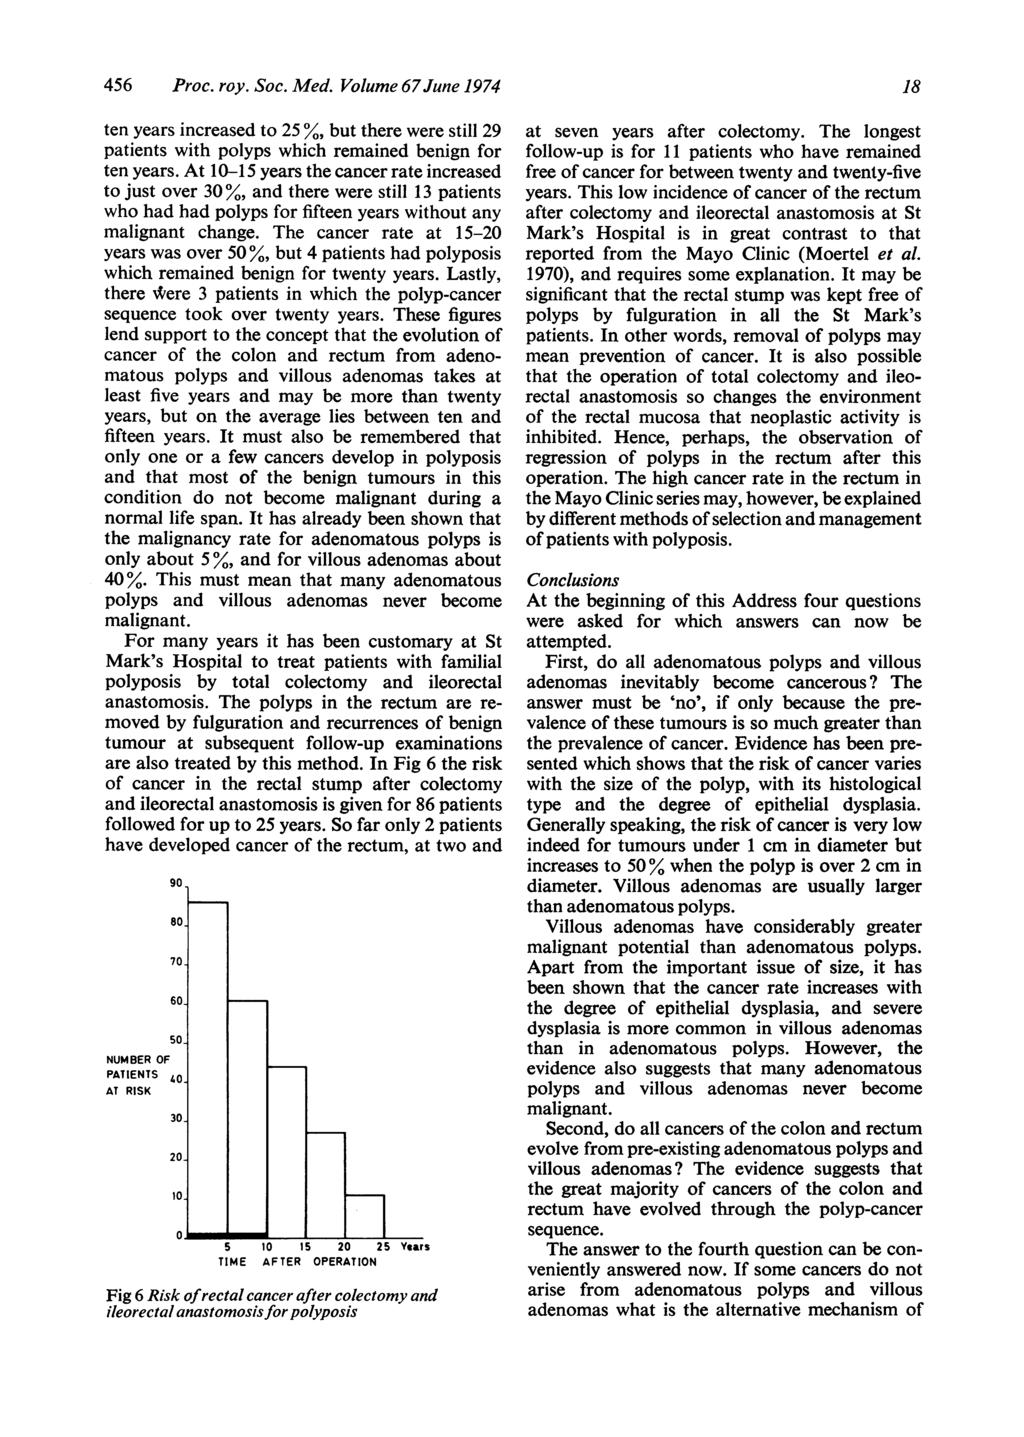 456 Proc. roy. Soc. Med. Volume 67 June 1974 ten years increased to 25 %, but there were still 29 patients with polyps which remained benign for ten years.